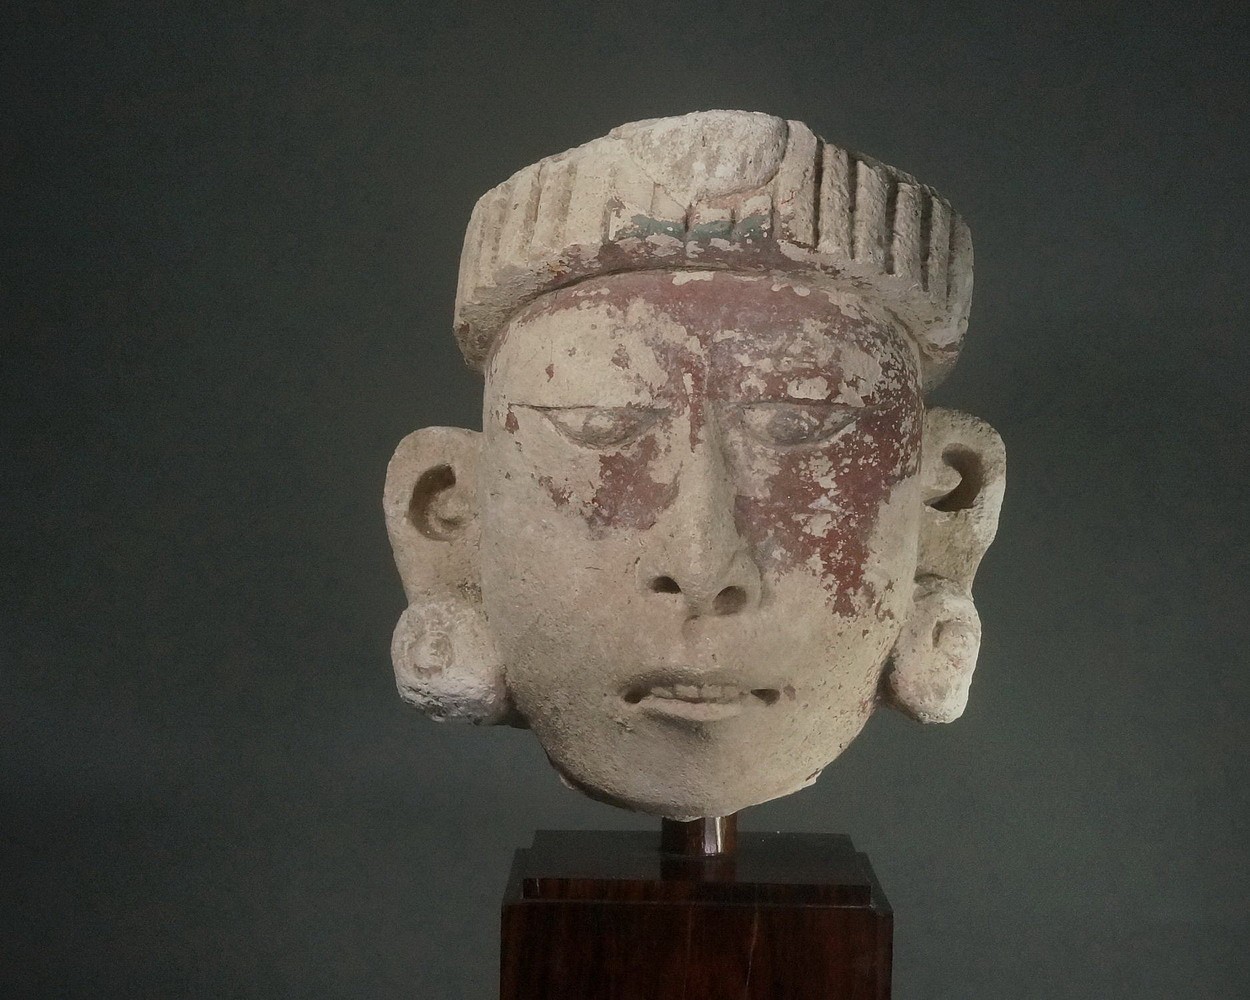 Mexico, Early Post-Classic Mayan Stucco Head Depicting a Priest
The priest’s eyes are looking down as if the head was placed high up on a wall.  
Ex. collection Hana Gallery, Tokyo, prior to 1970.
Media: Stone
Dimensions: Height: 10" x Width: 8 1/2"  Depth 7 1/2"
$27,000
n3045